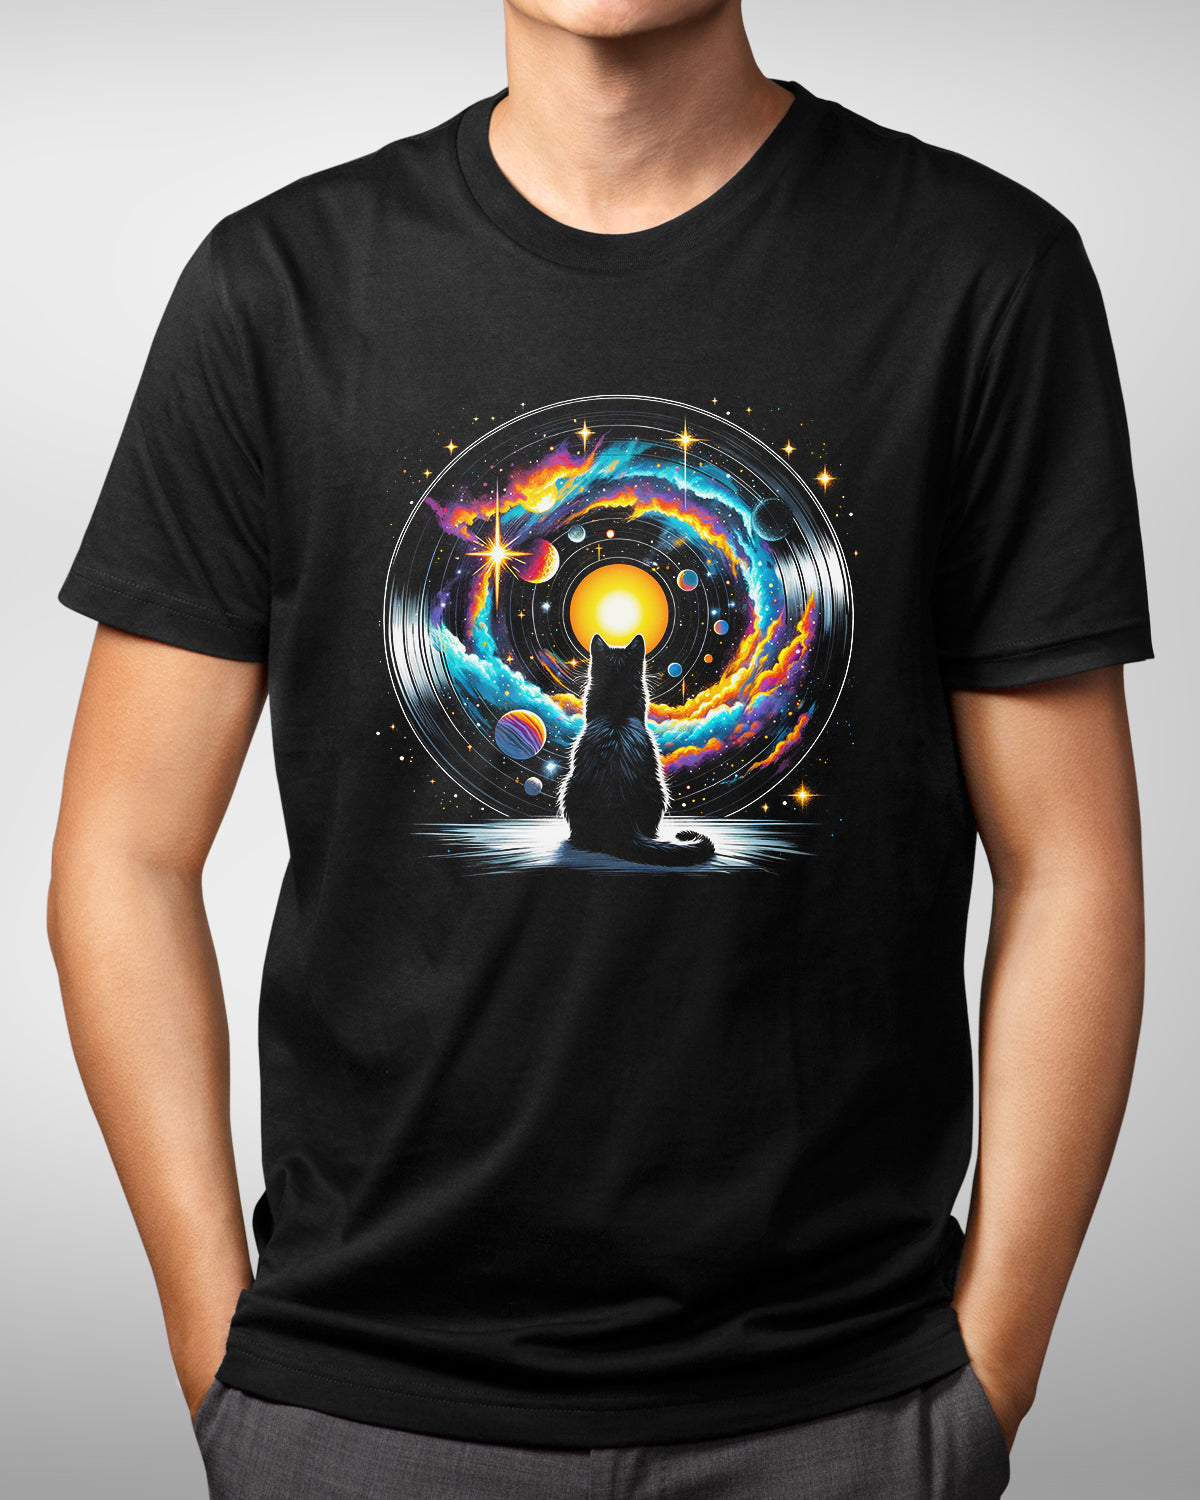 Space Cat Shirt, Cool Outer Space Galaxy Kitty Tee for Cat Lovers, Sci-Fi Solar System T-Shirt, Perfect Gift for Galaxy Enthusiasts